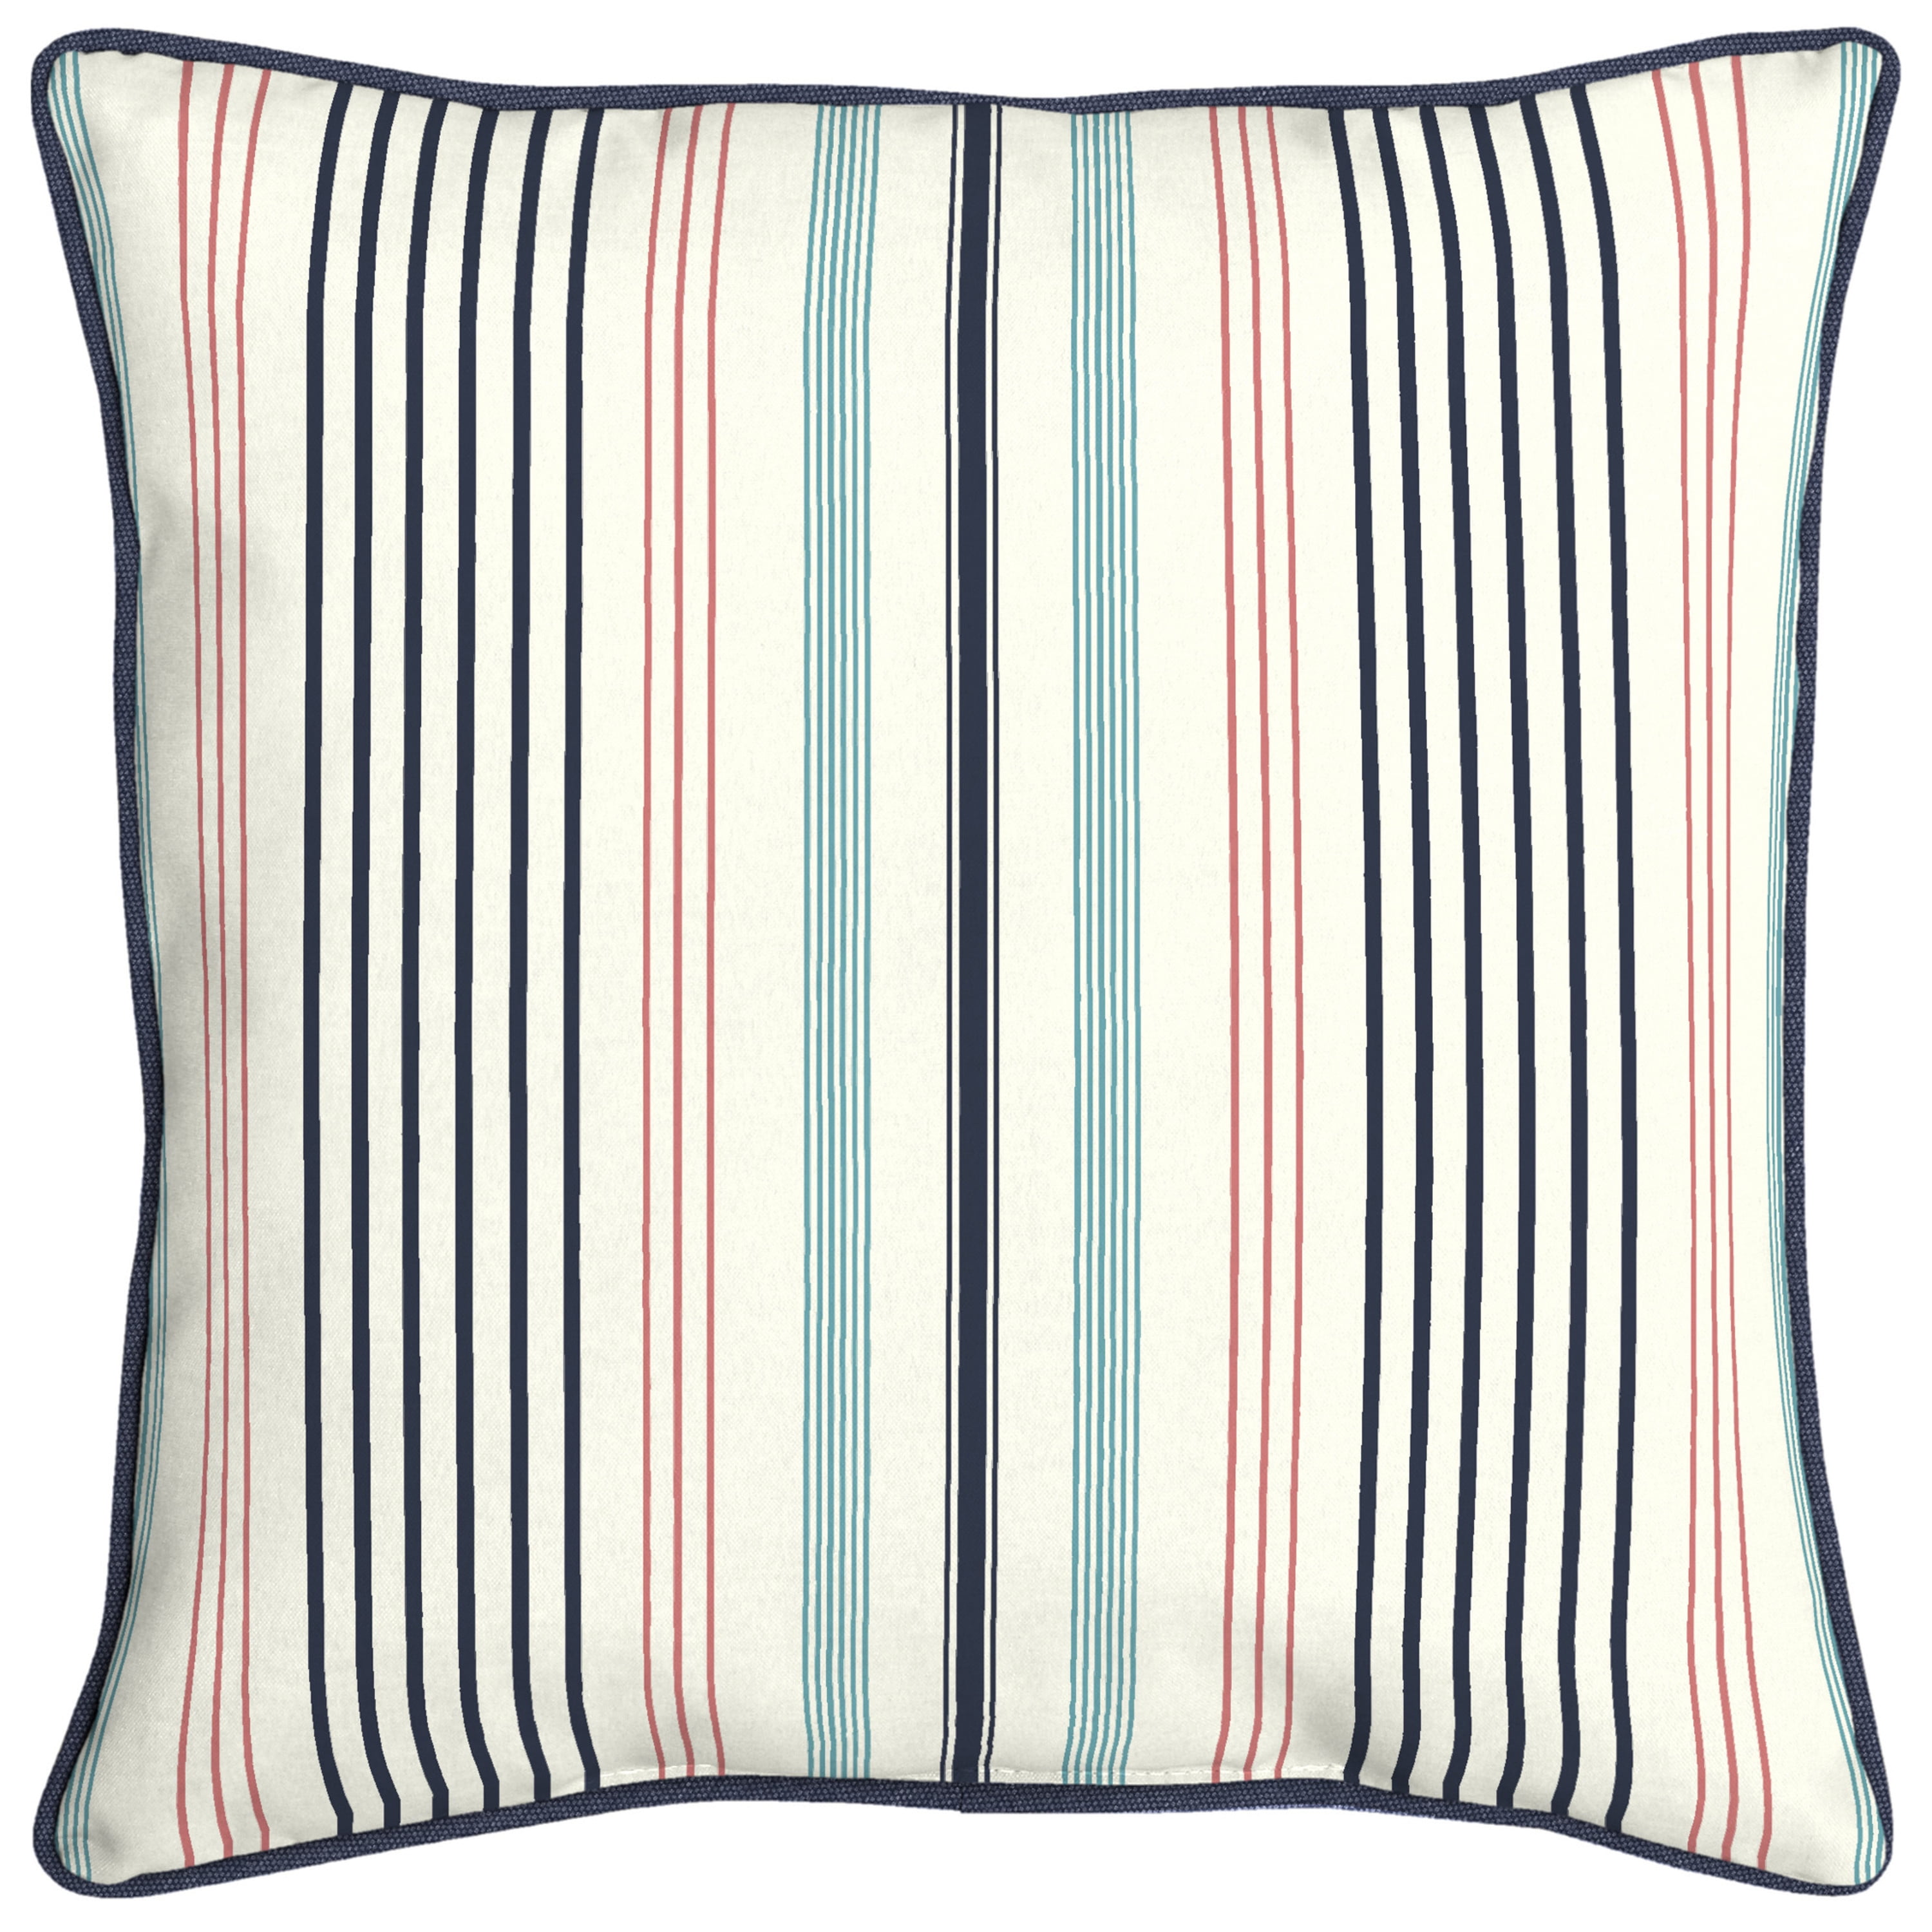 La Jolla Outdoor Striped Water Resistant Square Throw Pillows - Set of 4  Dark Teal/White -, 1 unit - Gerbes Super Markets